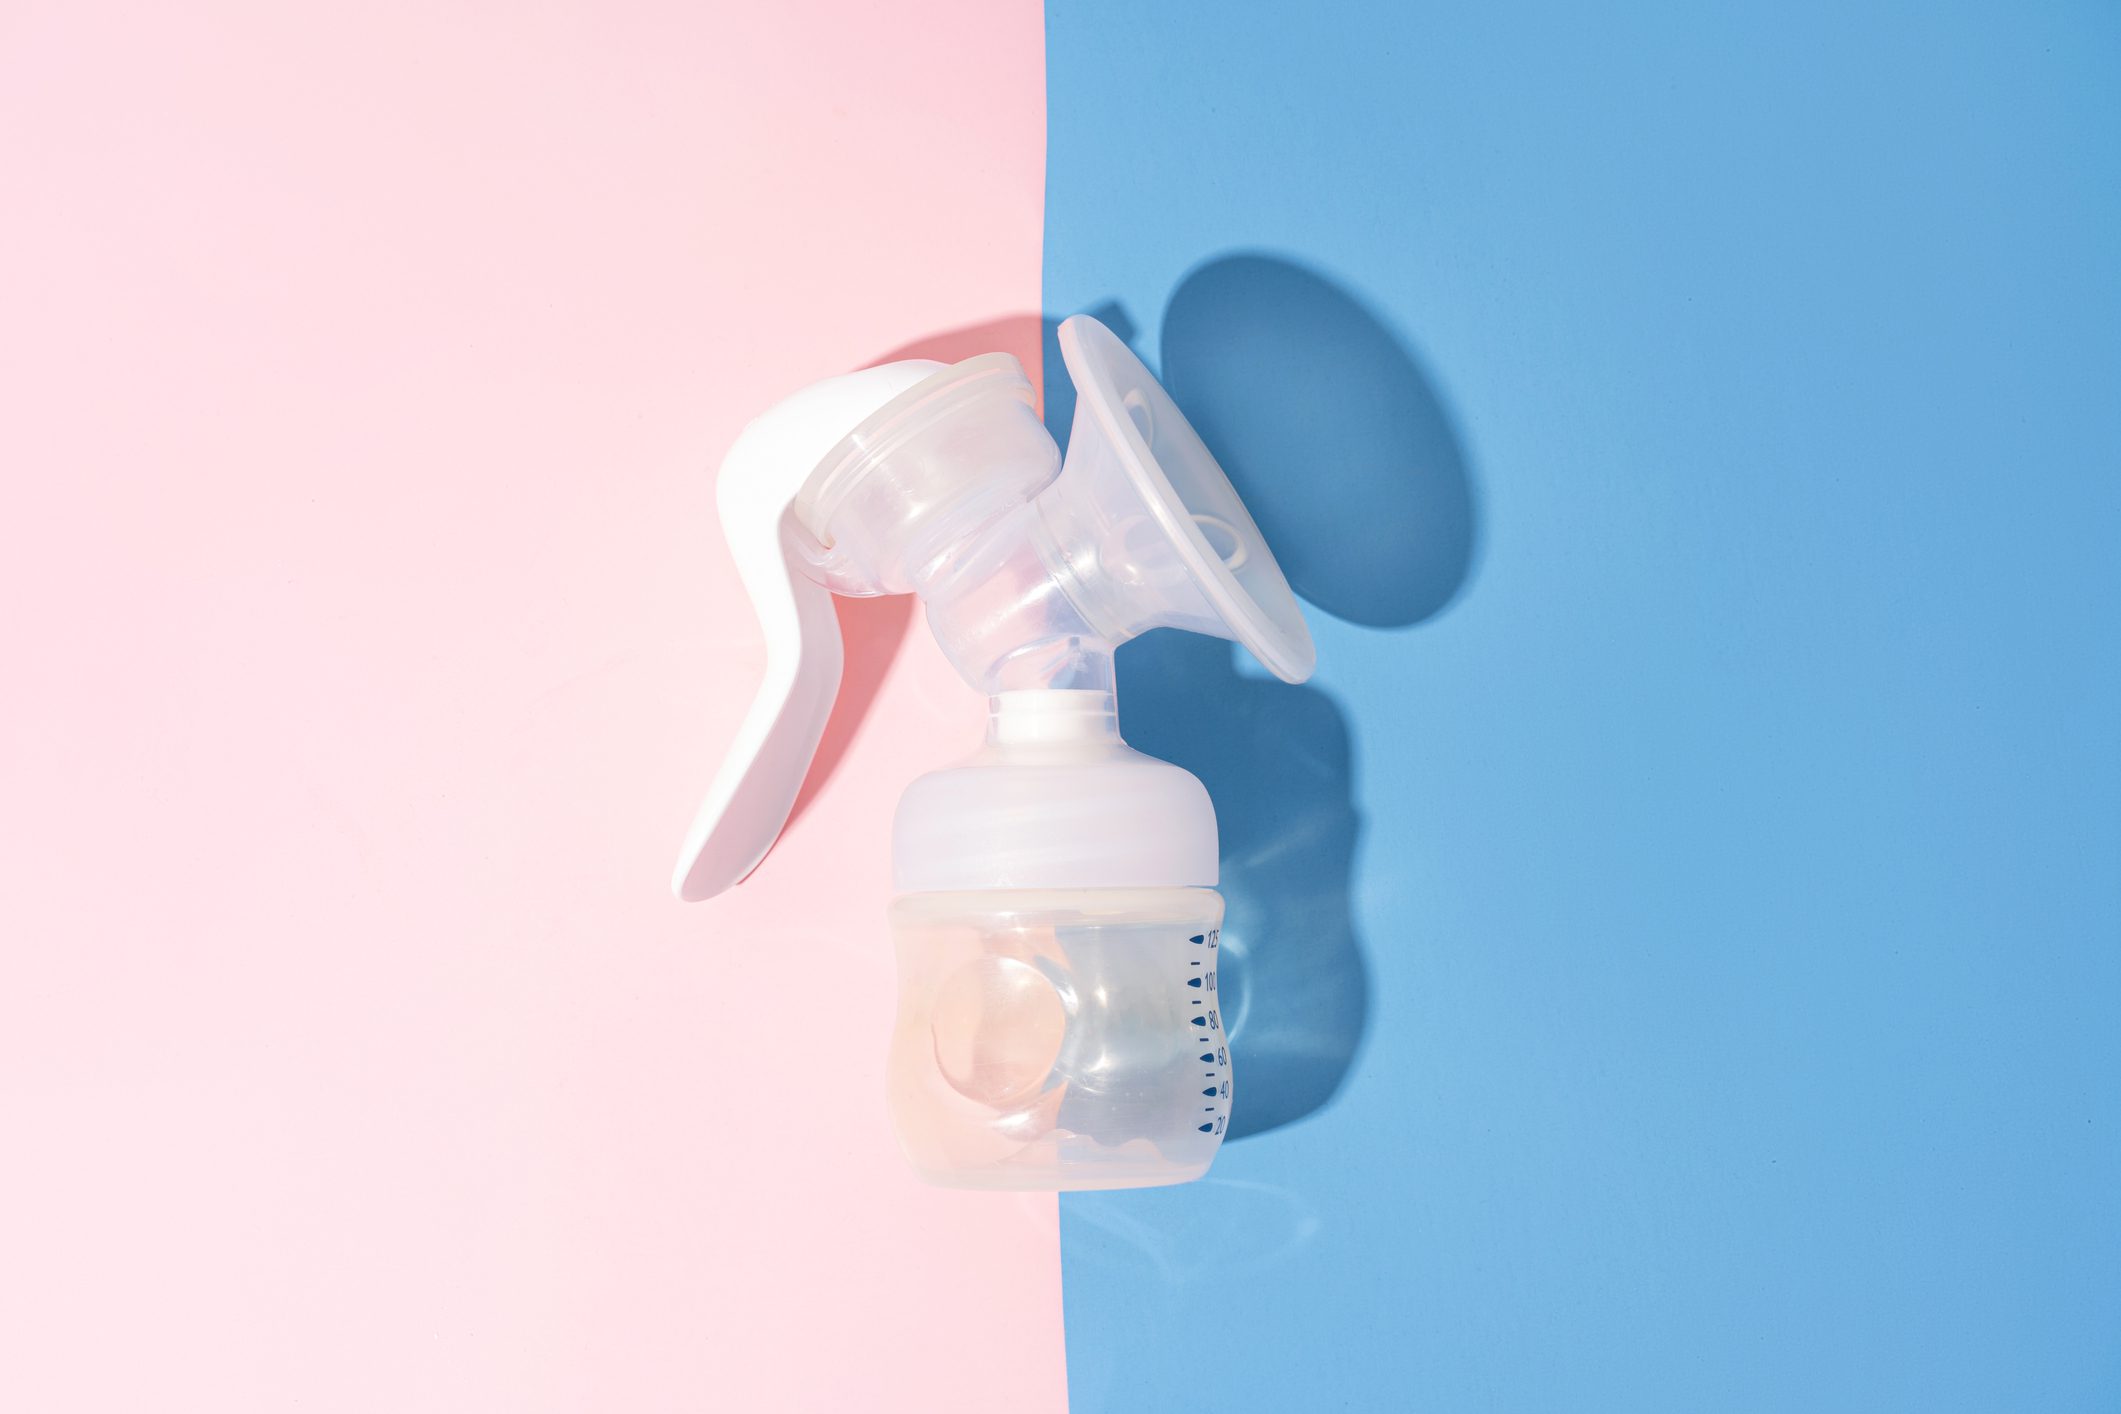 Manual breast pump on blue and pink background with hard shadows.